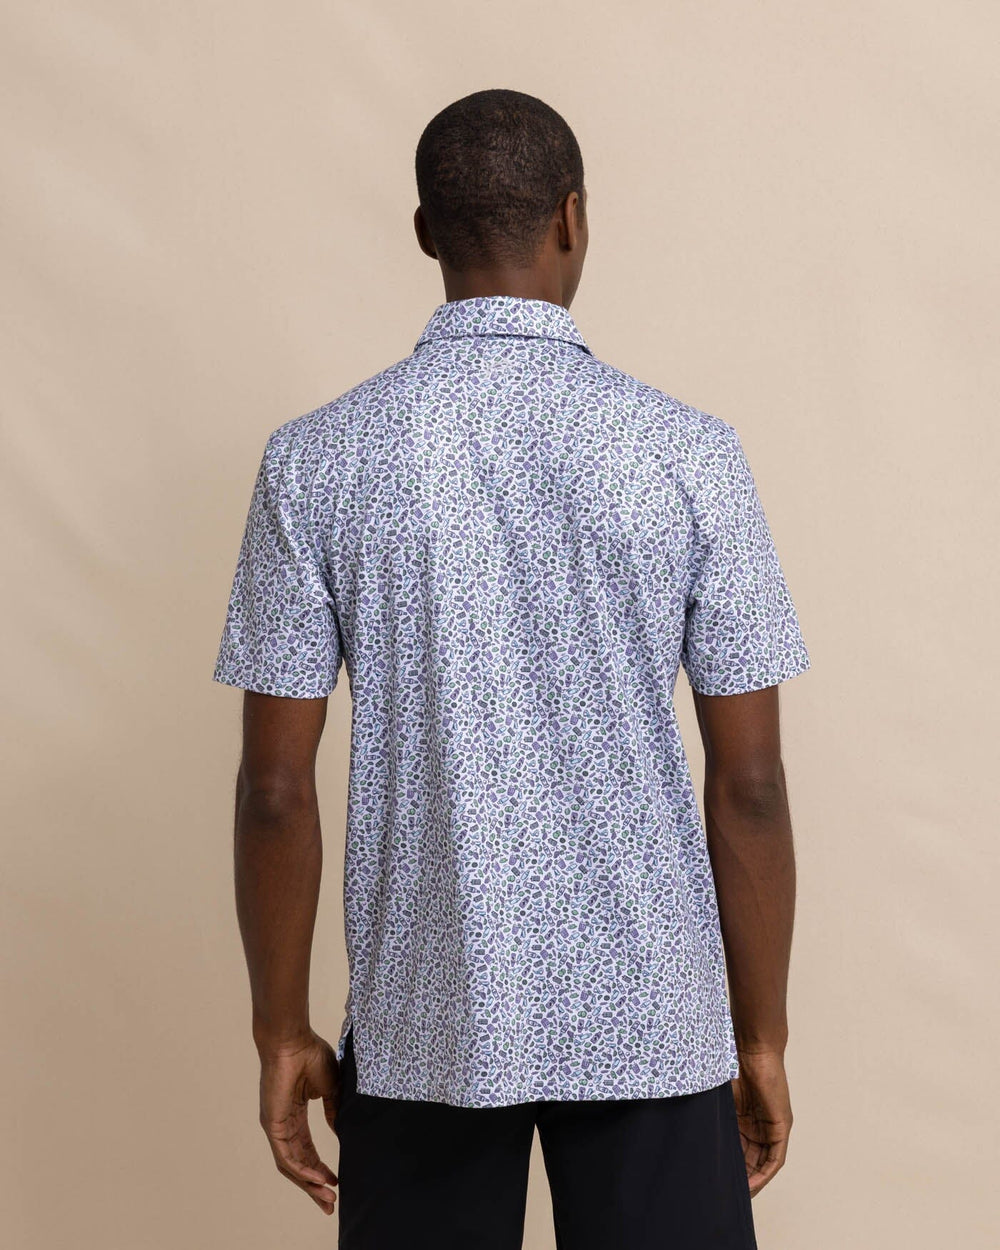 The back view of the Southern Tide Driver Dazed and Transfused Printed Polo by Southern Tide - Classic White